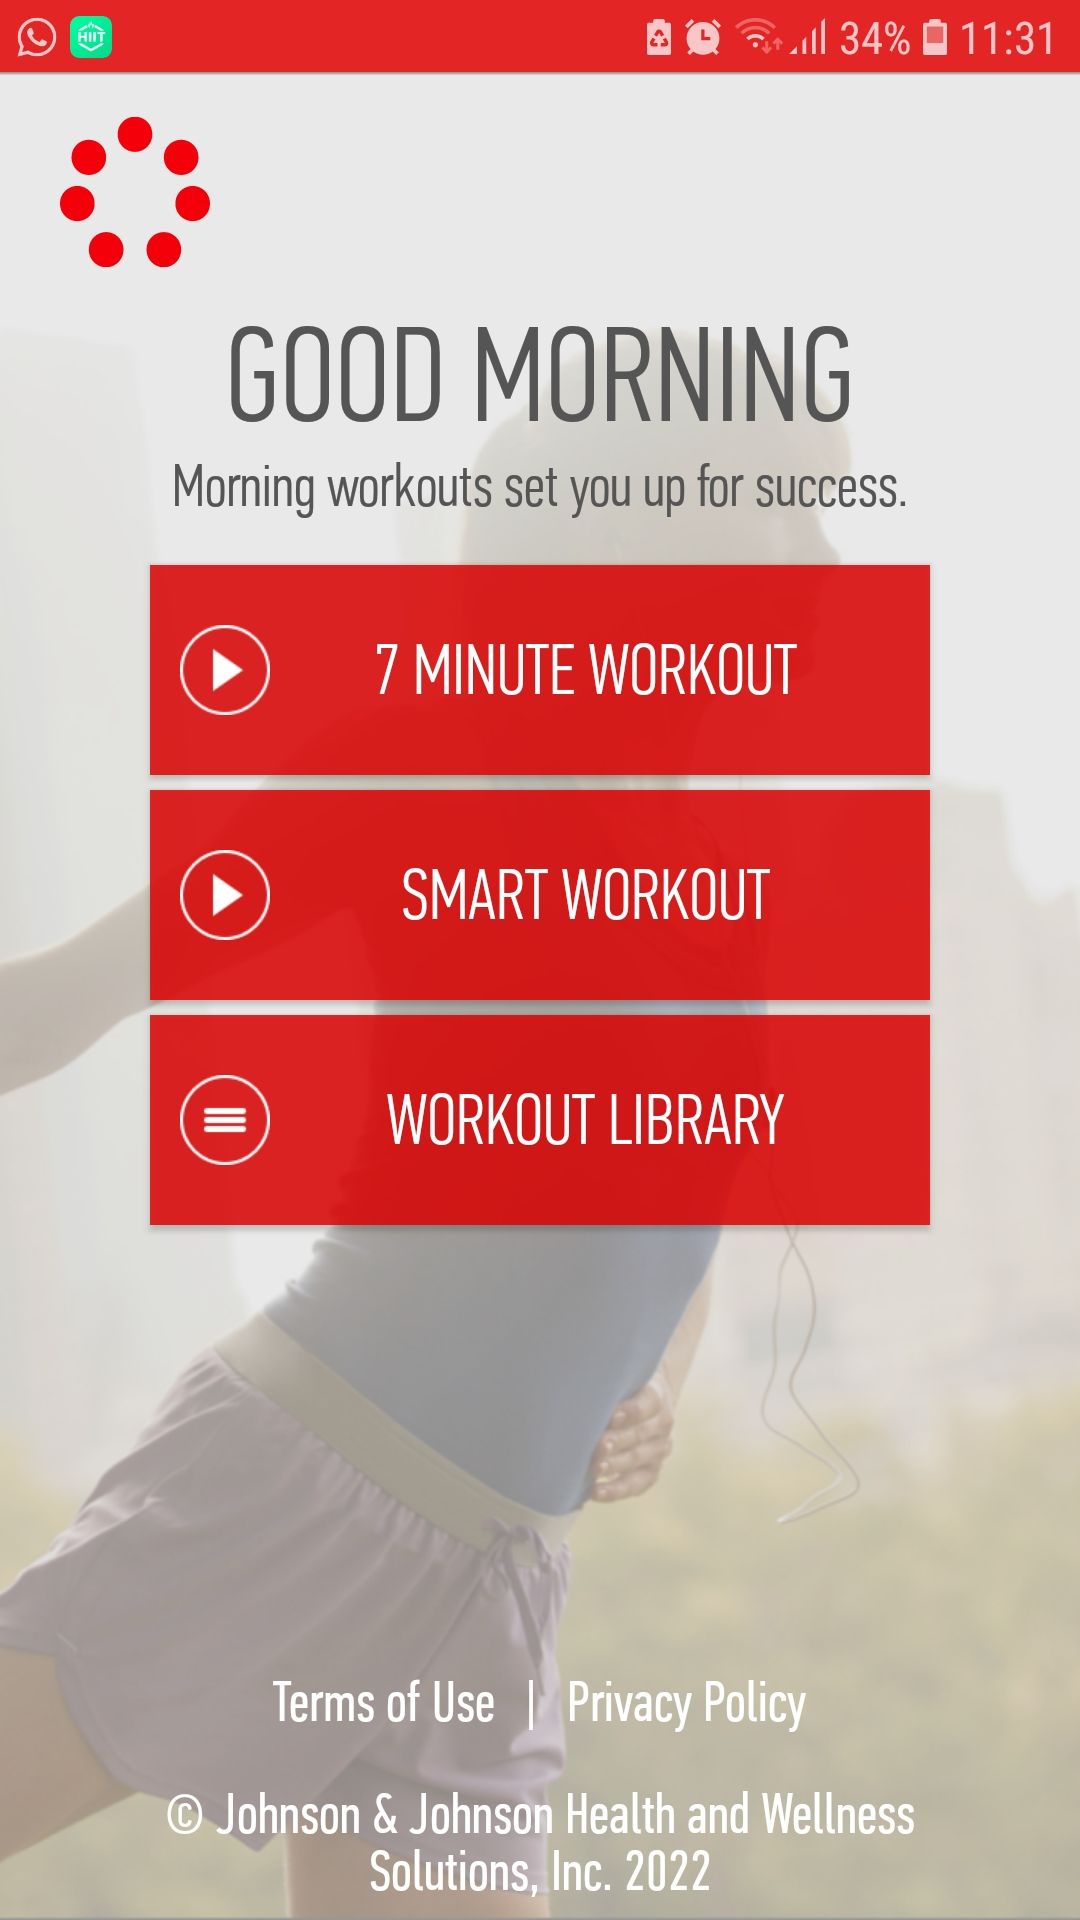 Official 7M Workout mobile fitness app